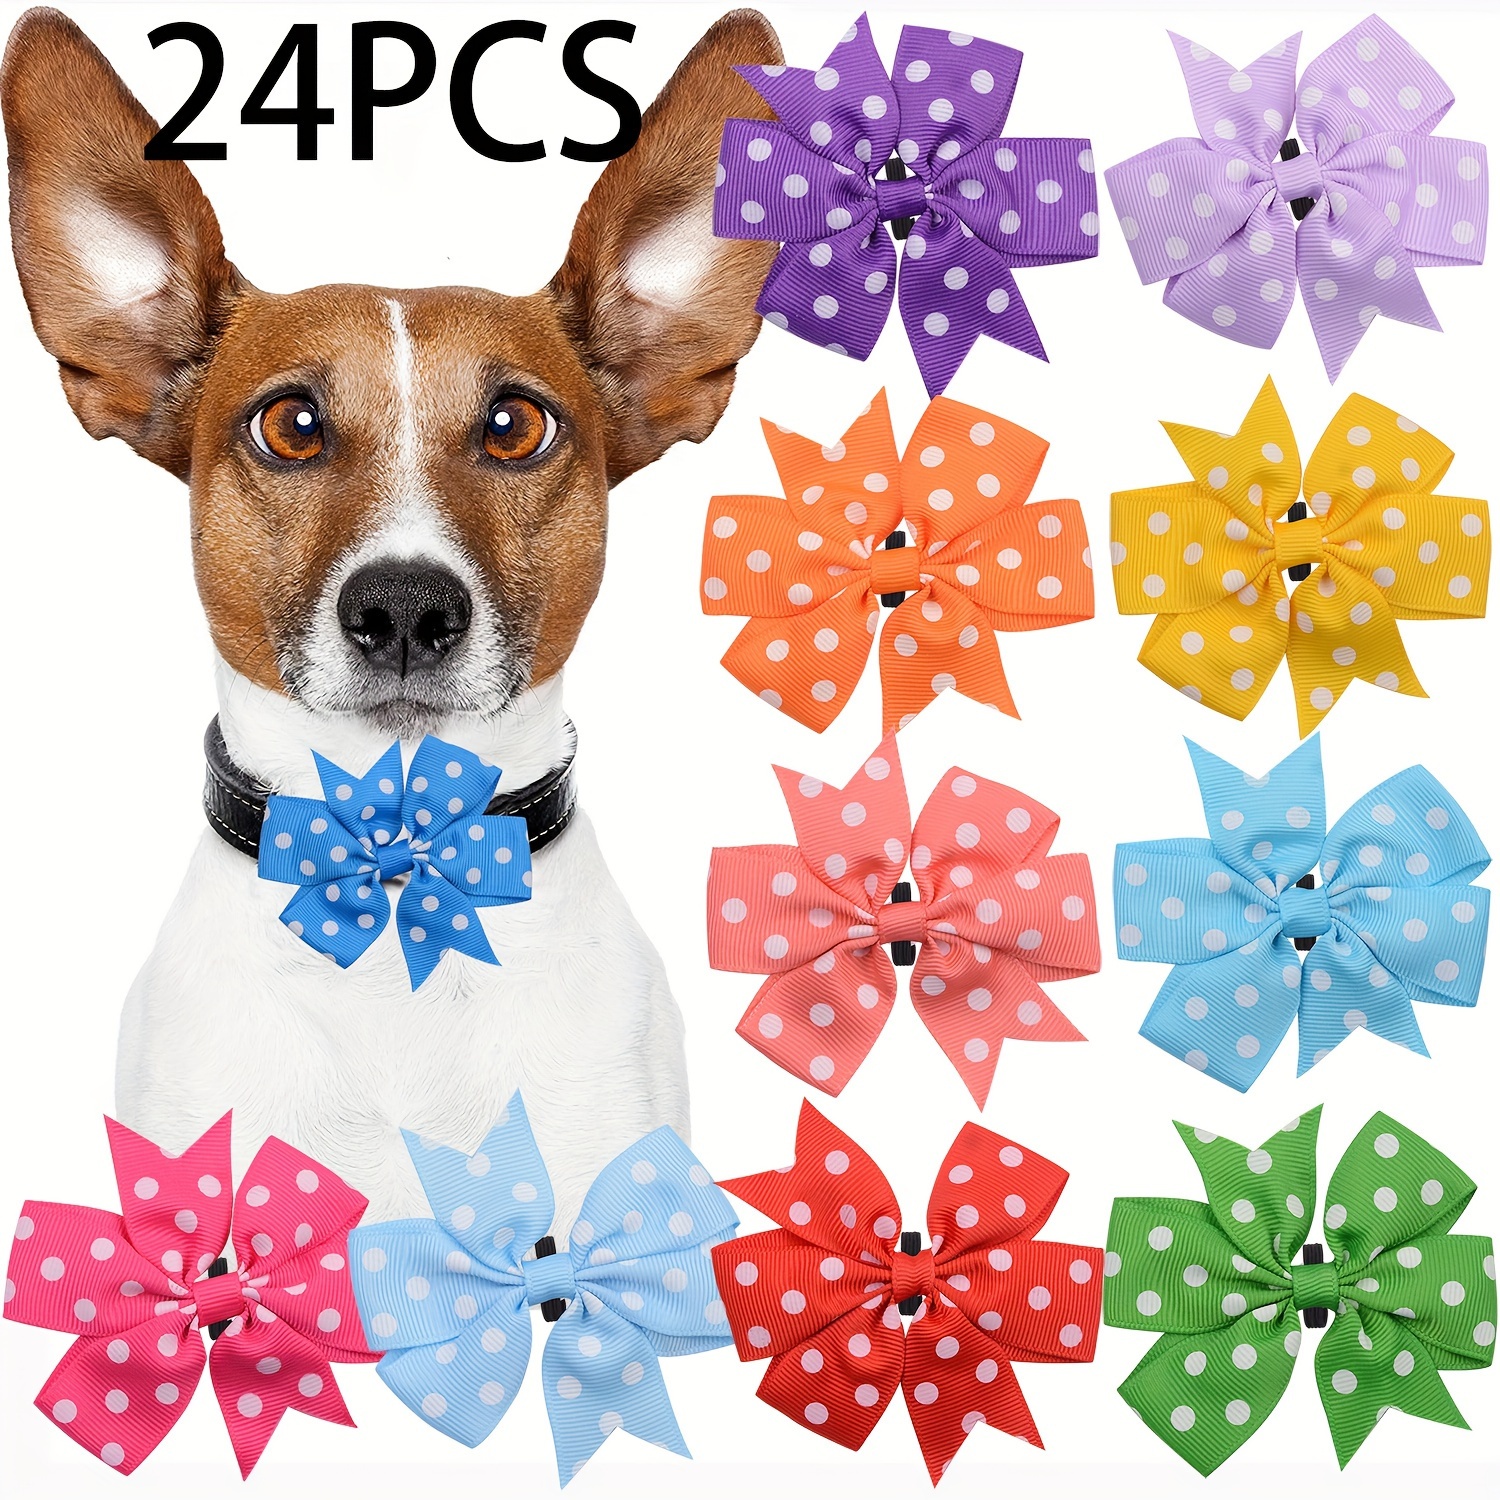 

24 Pack Cute Polka Dot Pet Bow Ties For Dogs - Easy-to-wear, Detachable, Adjustable Collar Accessories - Butterfly Shape Design Perfect For Pet Grooming & Daily Wear - Ideal For All Sizes